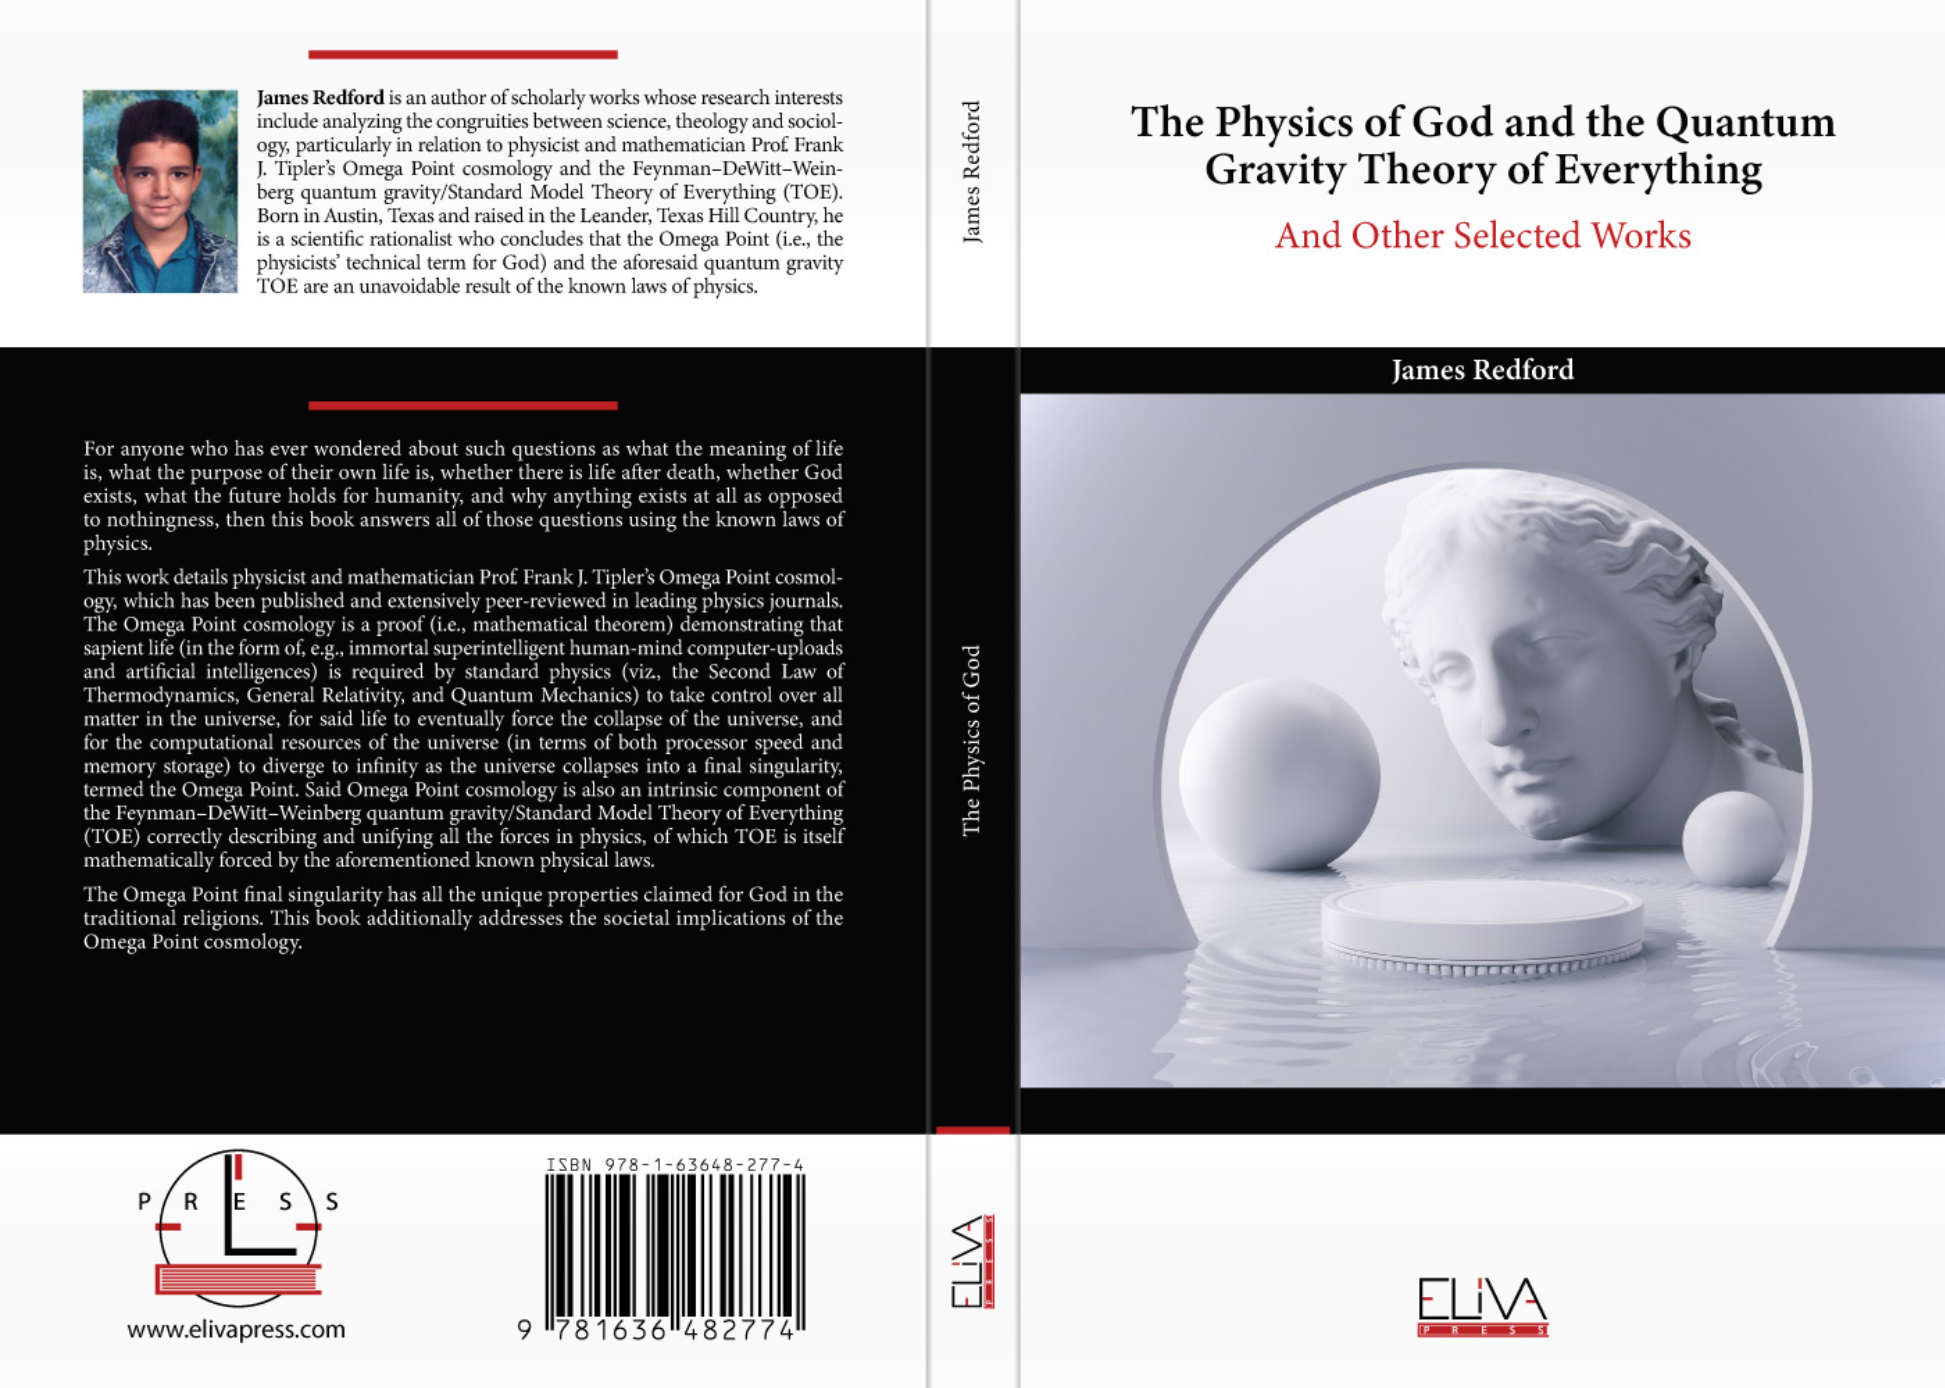 James Redford, The Physics of God and the Quantum Gravity Theory of Everything: And Other Selected Works (Chișinău, Moldova: Eliva Press, 2021), 268 pp., ISBN-10: 1636482775, ISBN-13: 9781636482774.